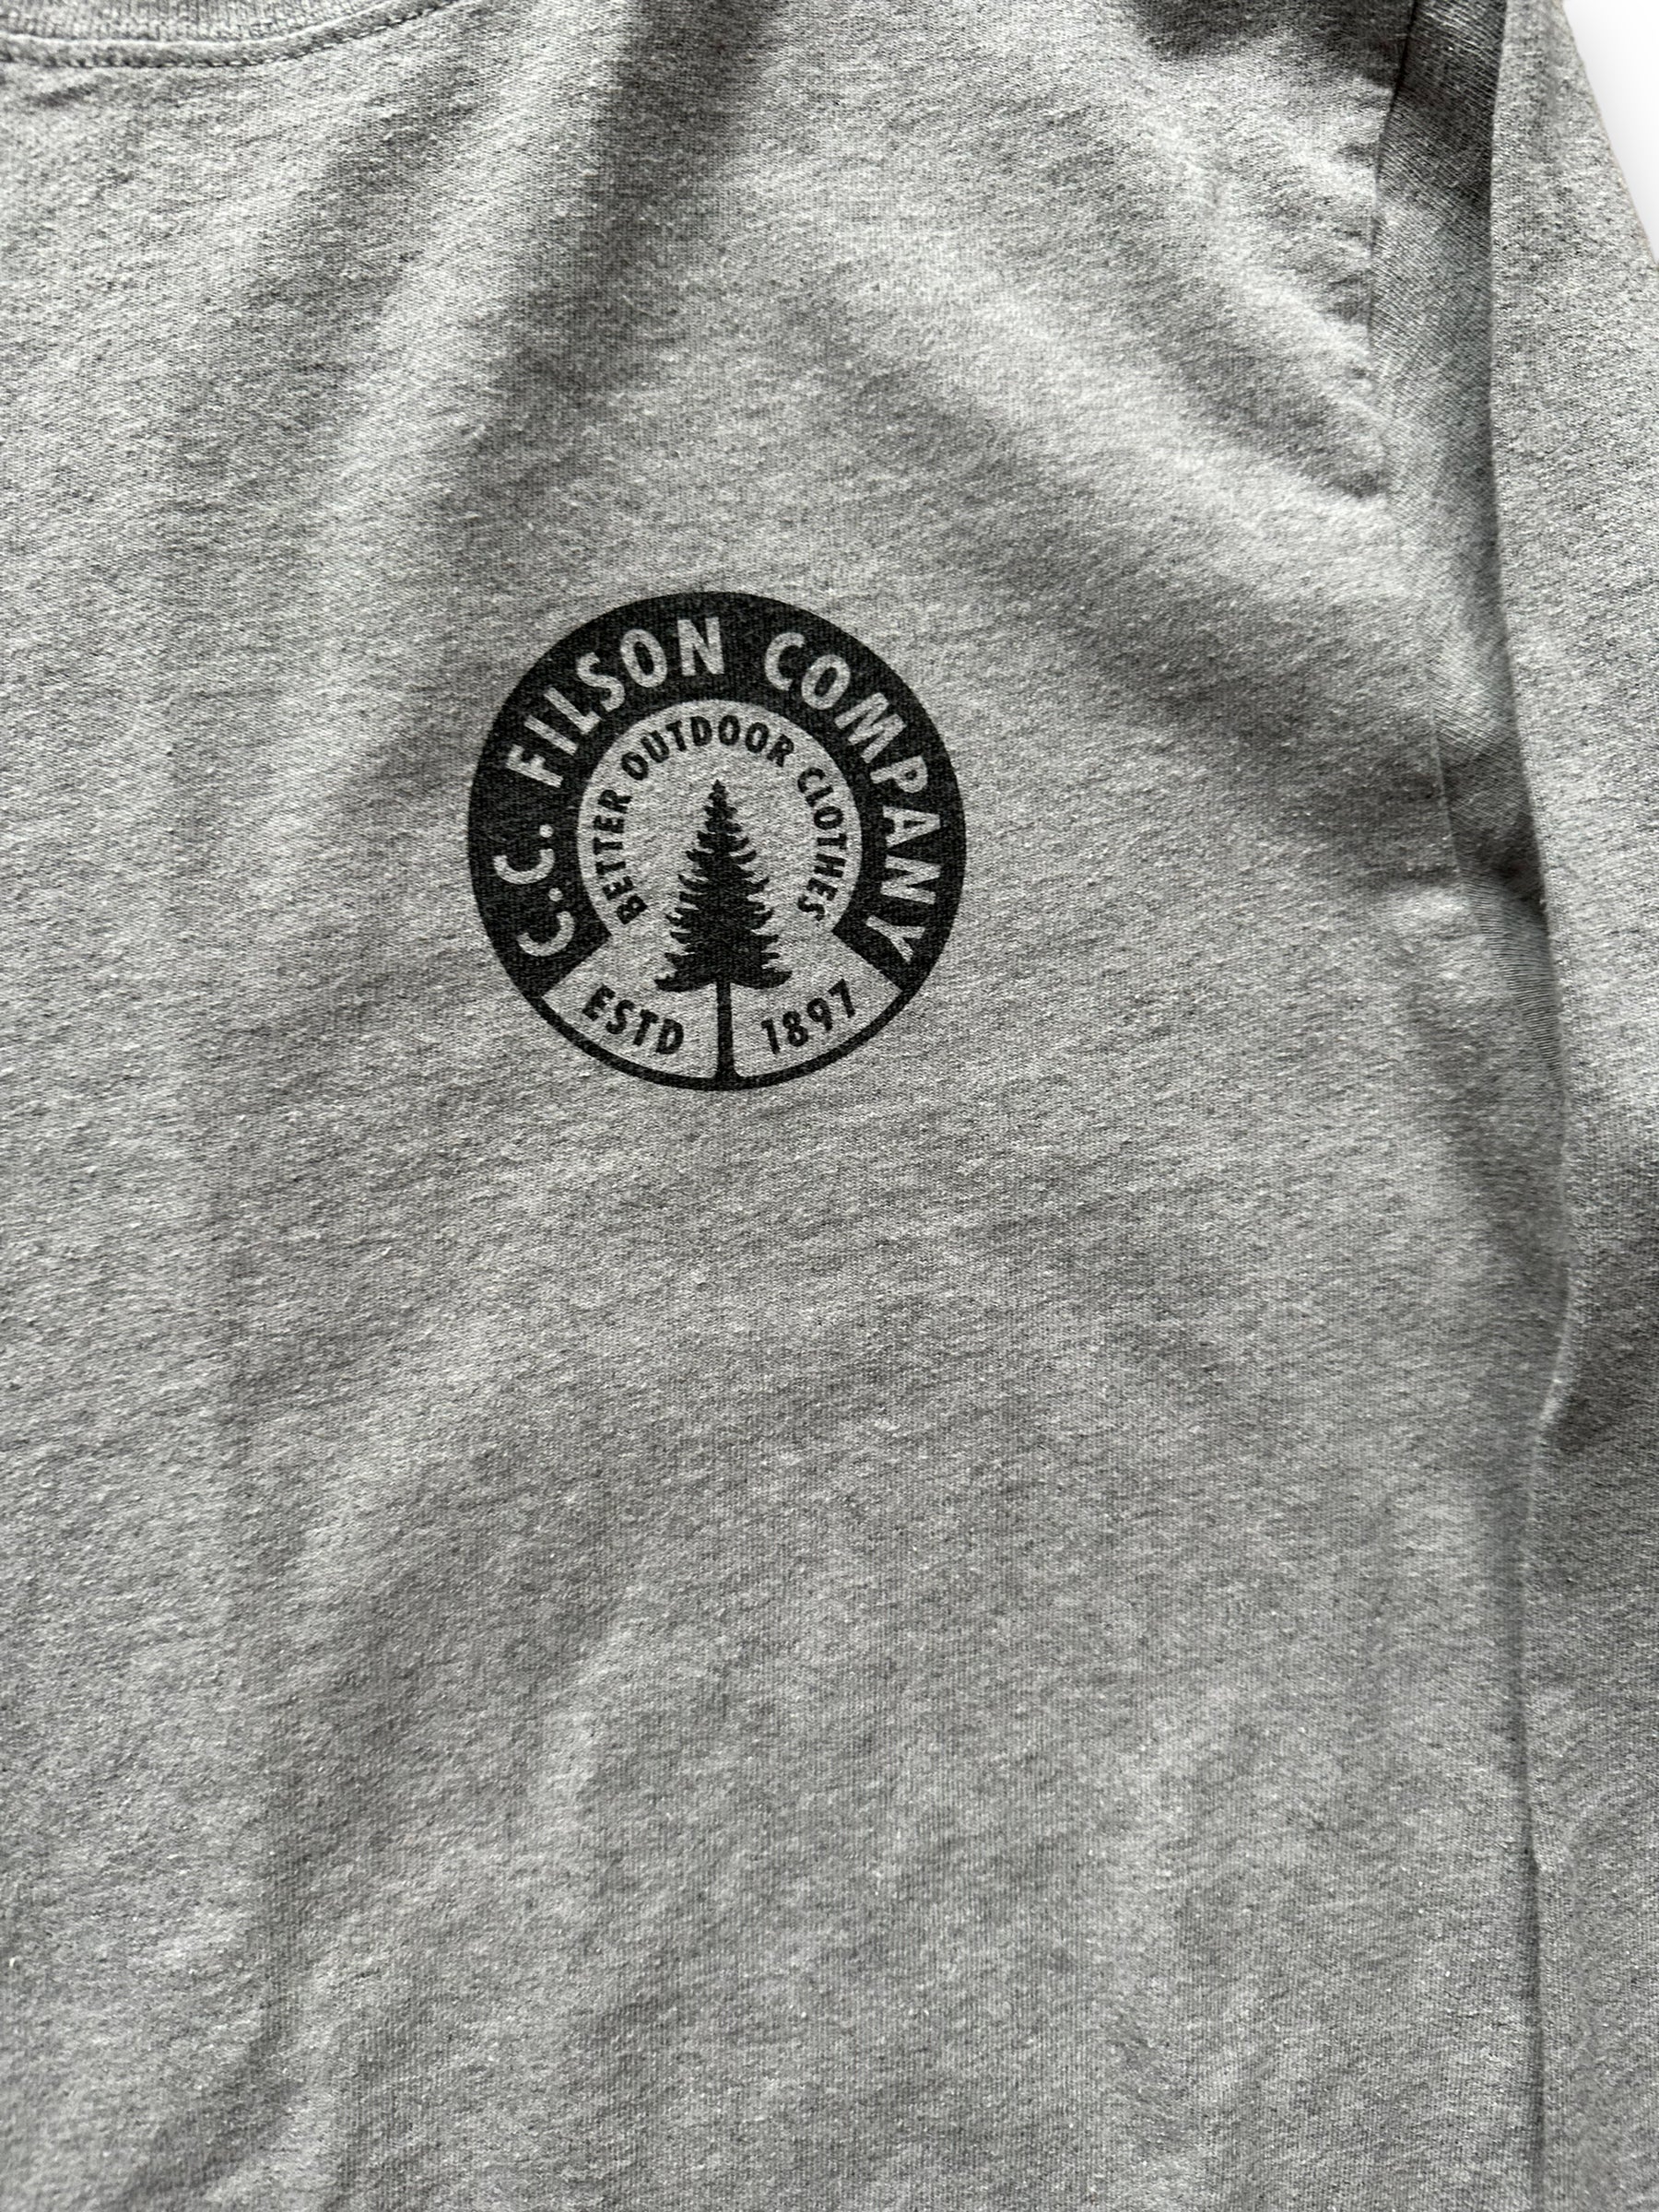 Front Graphic Detail on Filson Long Sleeve Heather Grey Tee SZ XS  |  Barn Owl Vintage Goods | Filson Graphic Tees Seattle